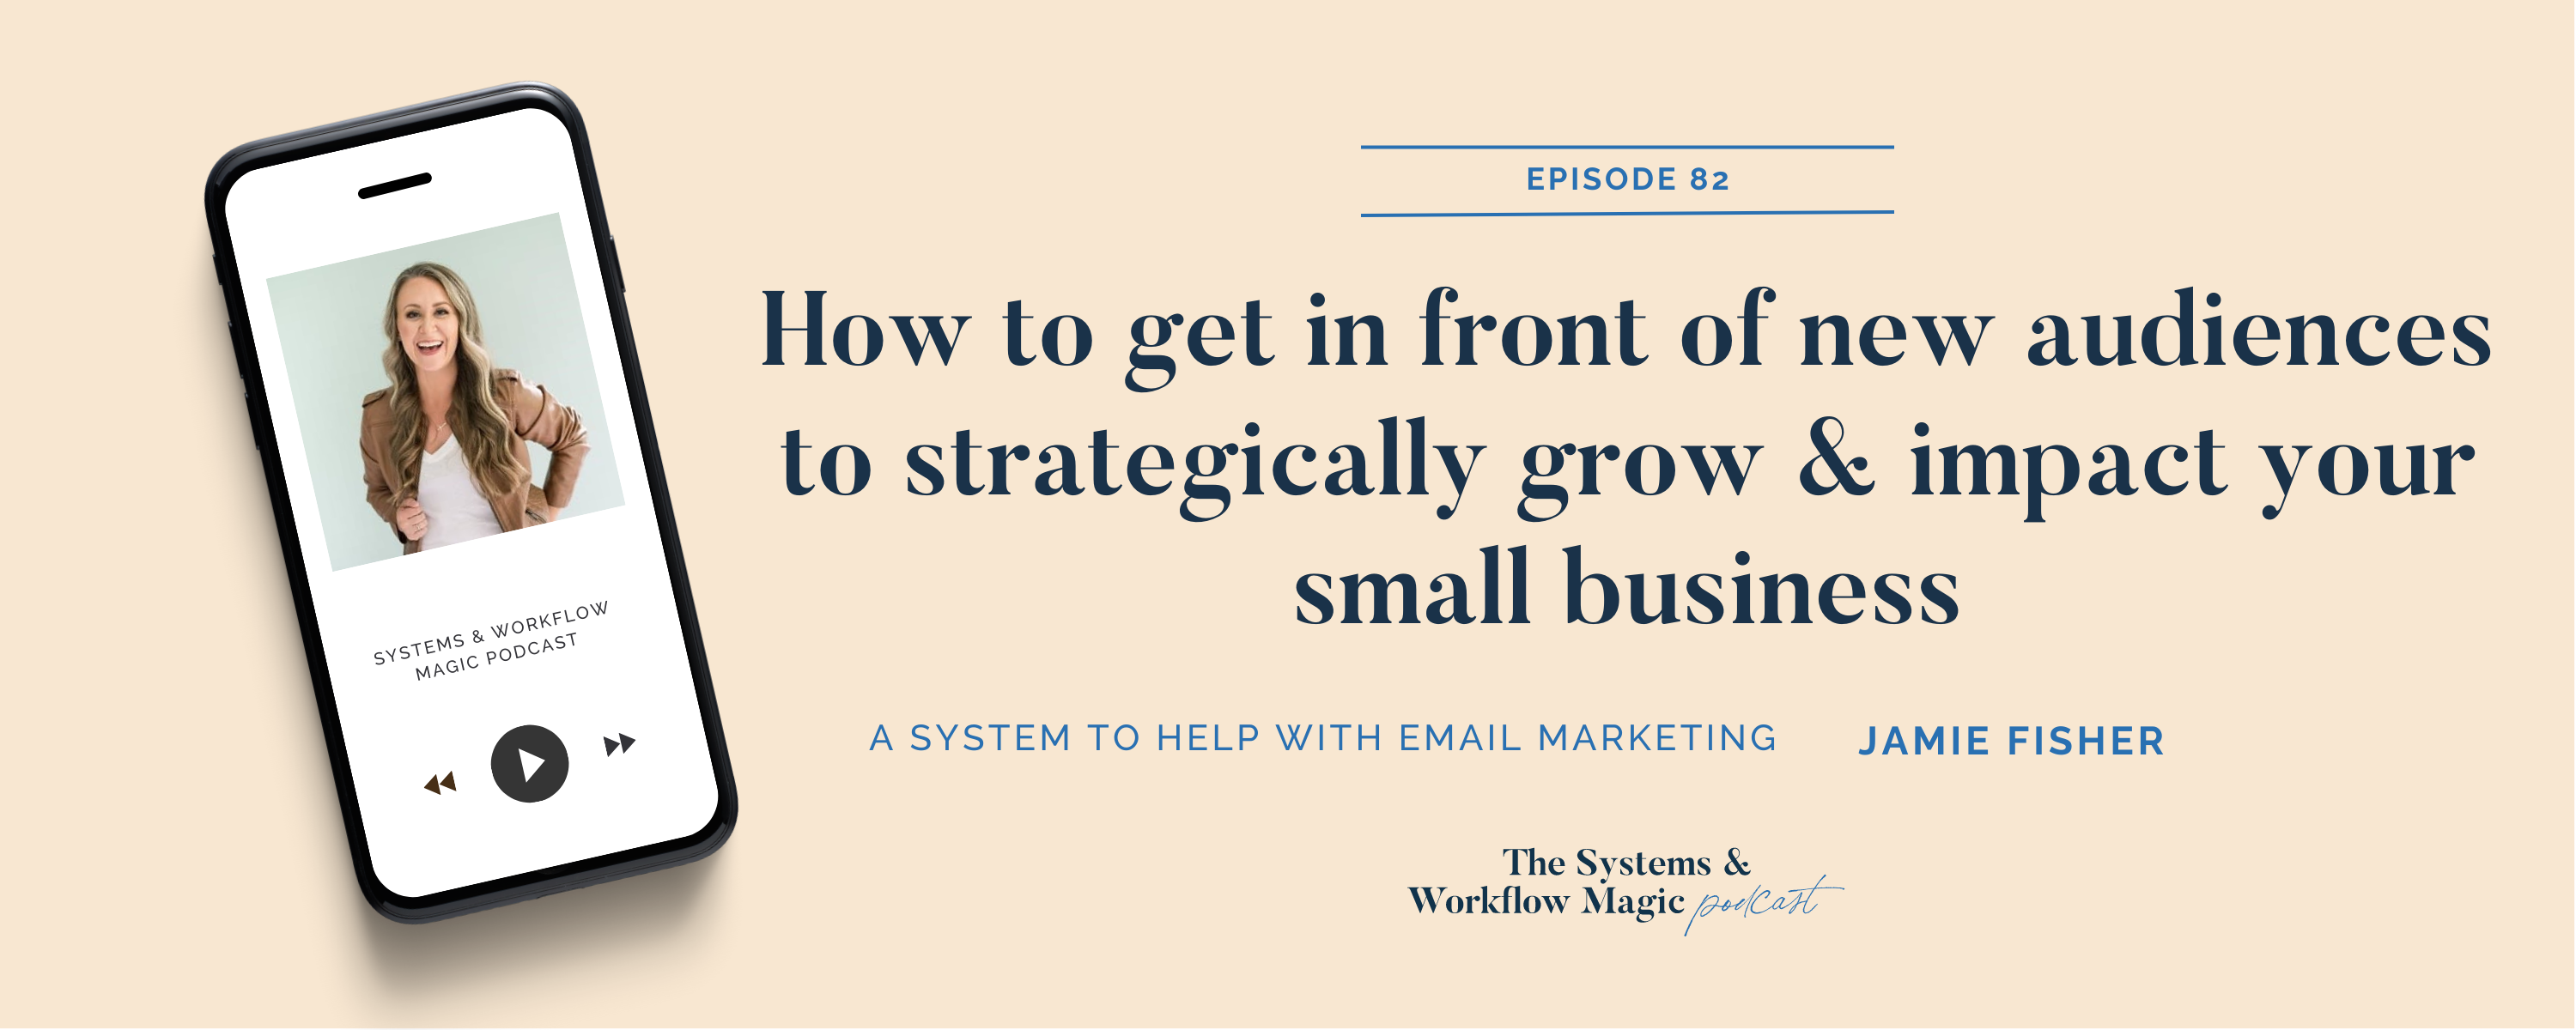 82: How to Get in Front of New Audiences to Strategically Grow Your Small Business featuring Jamie Fisher